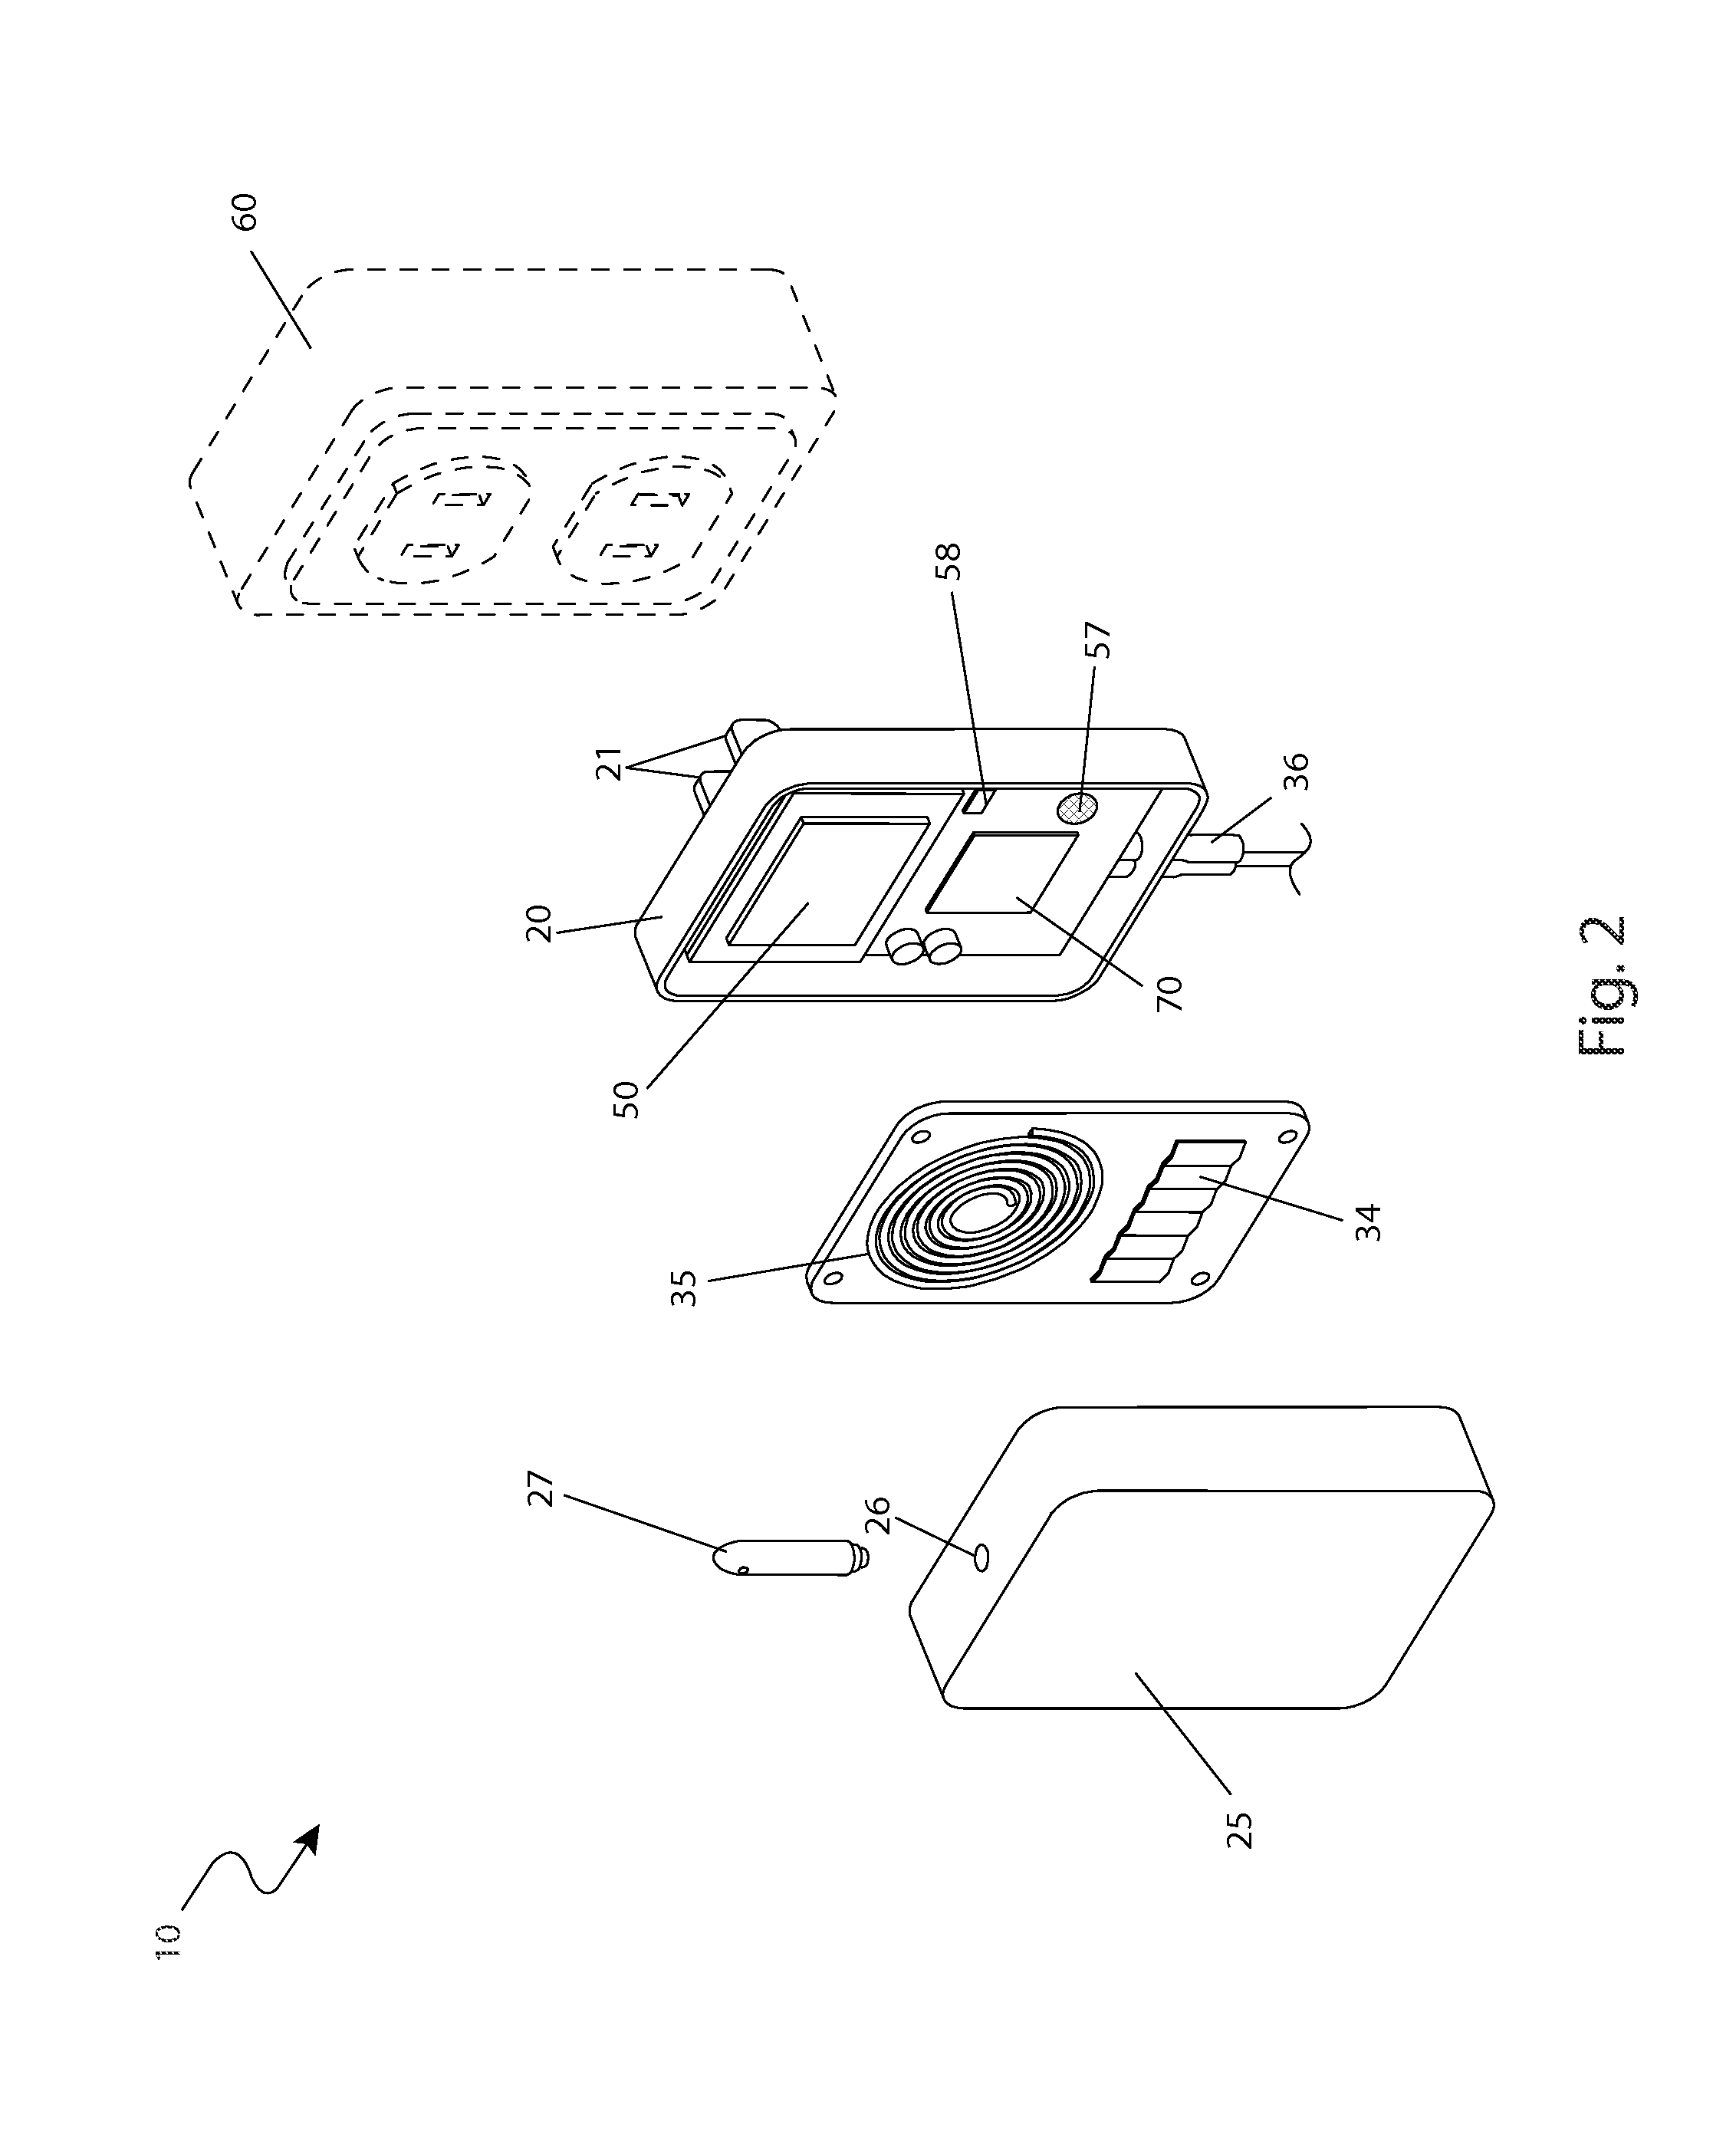 In-line utility shut-off system and method of use thereof